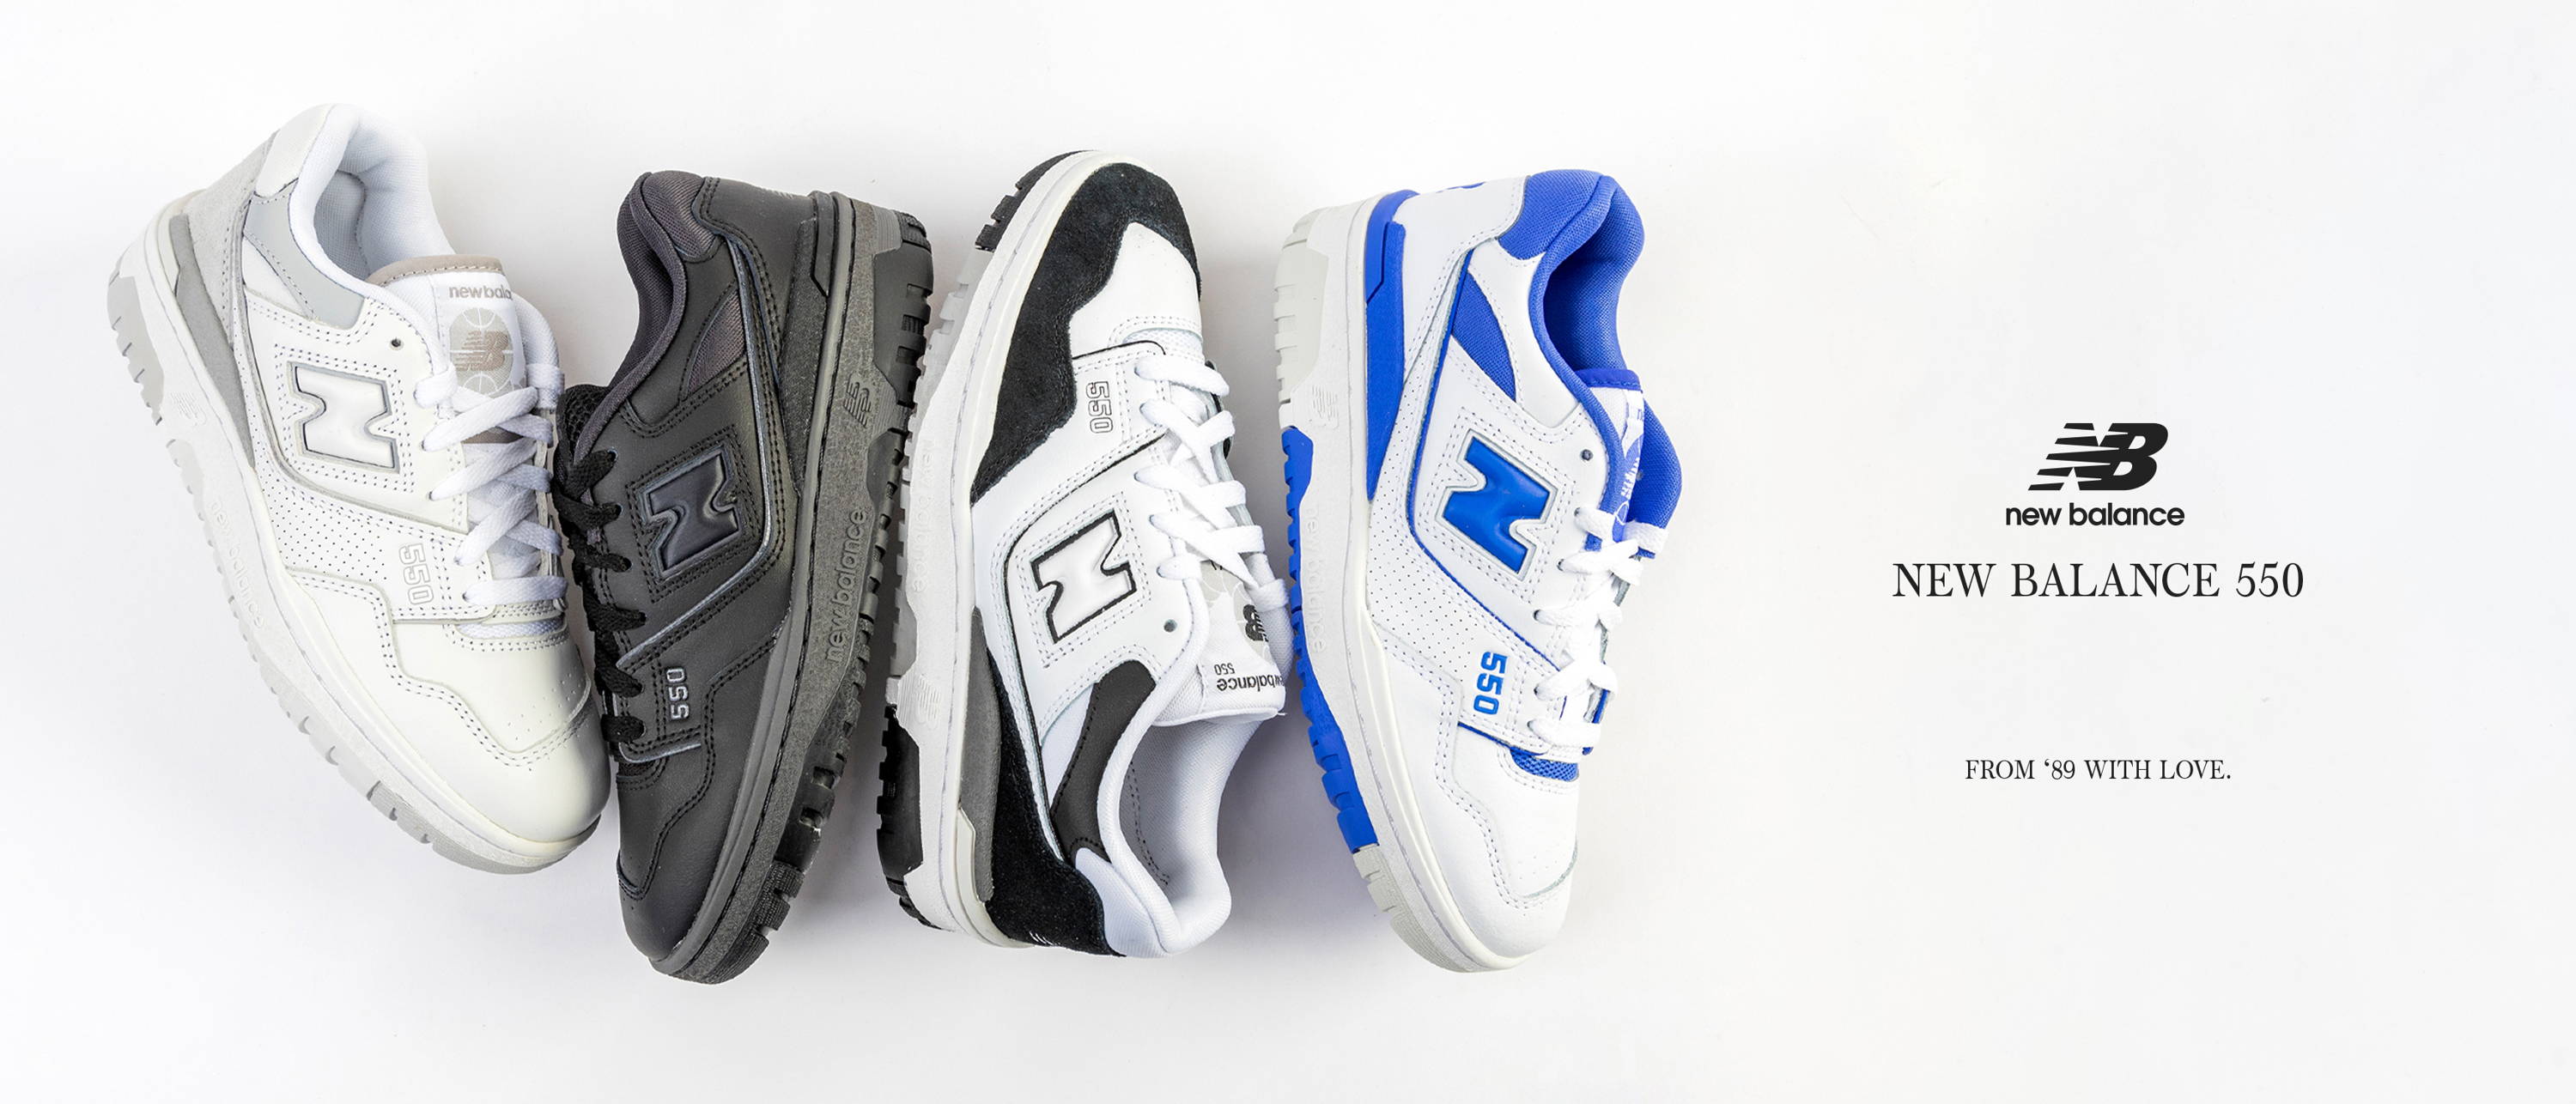 new balance collection of 4 shoes